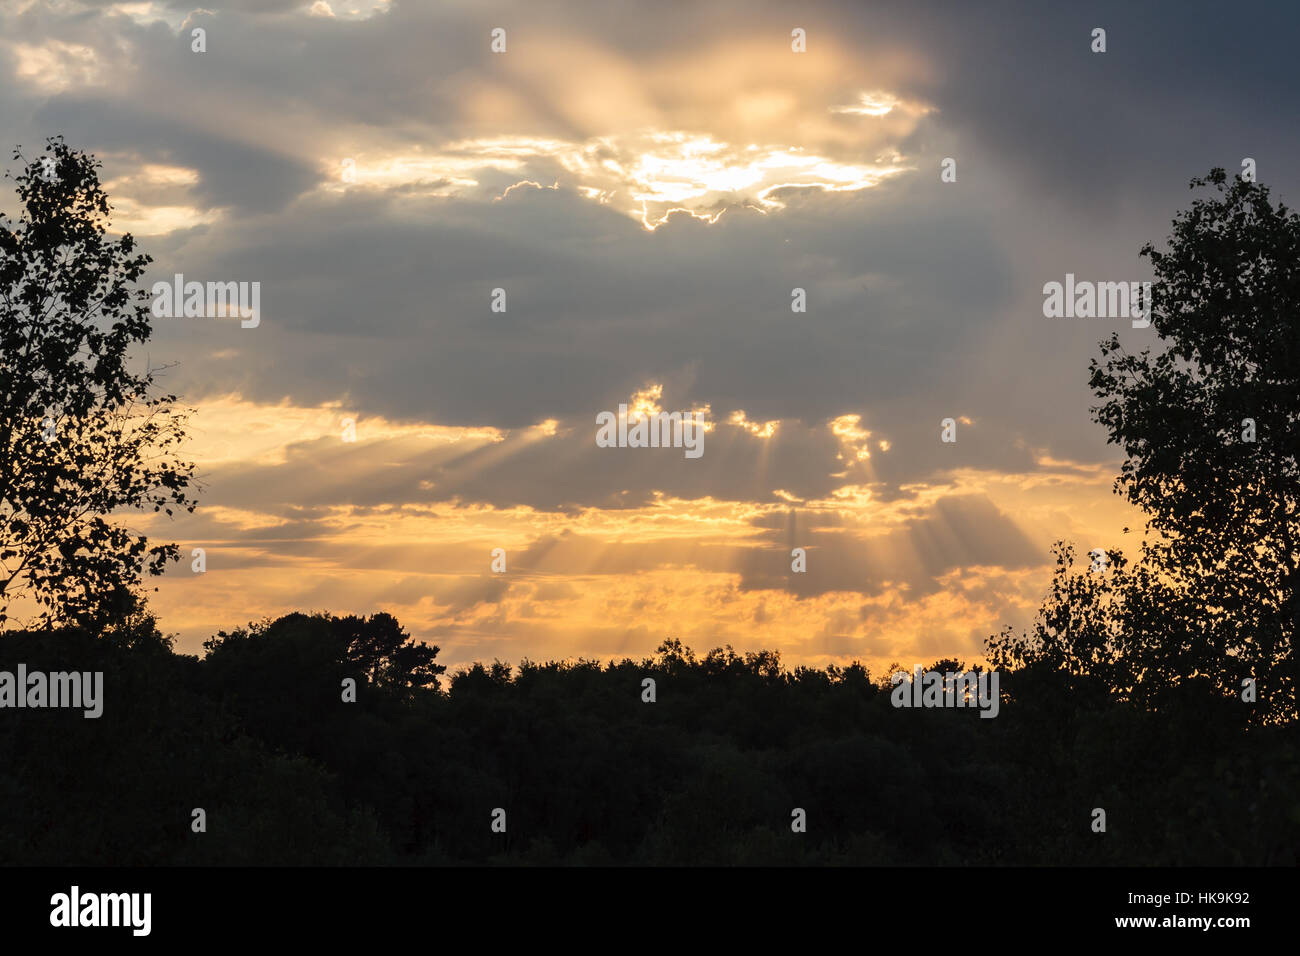 Rays of sunlight from behind clouds at sunset Stock Photo